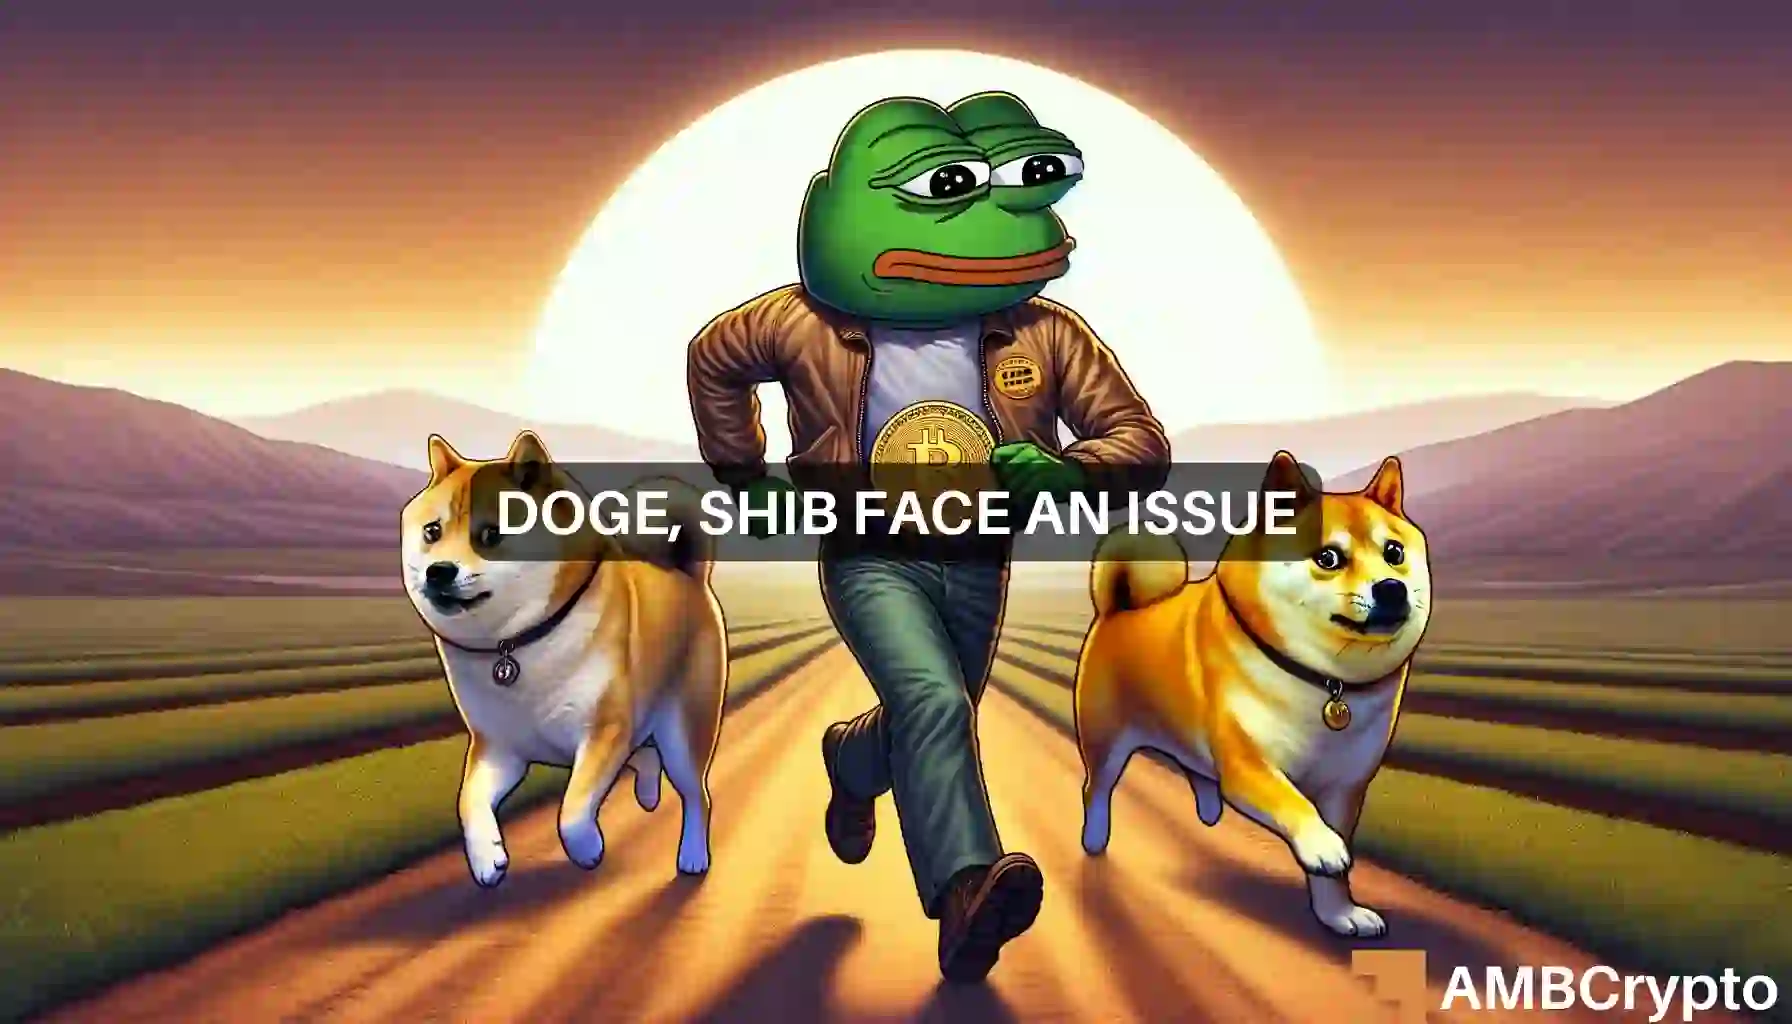 Shiba Inu, Dogecoin left behind: Will PEPE be the new memecoin king?